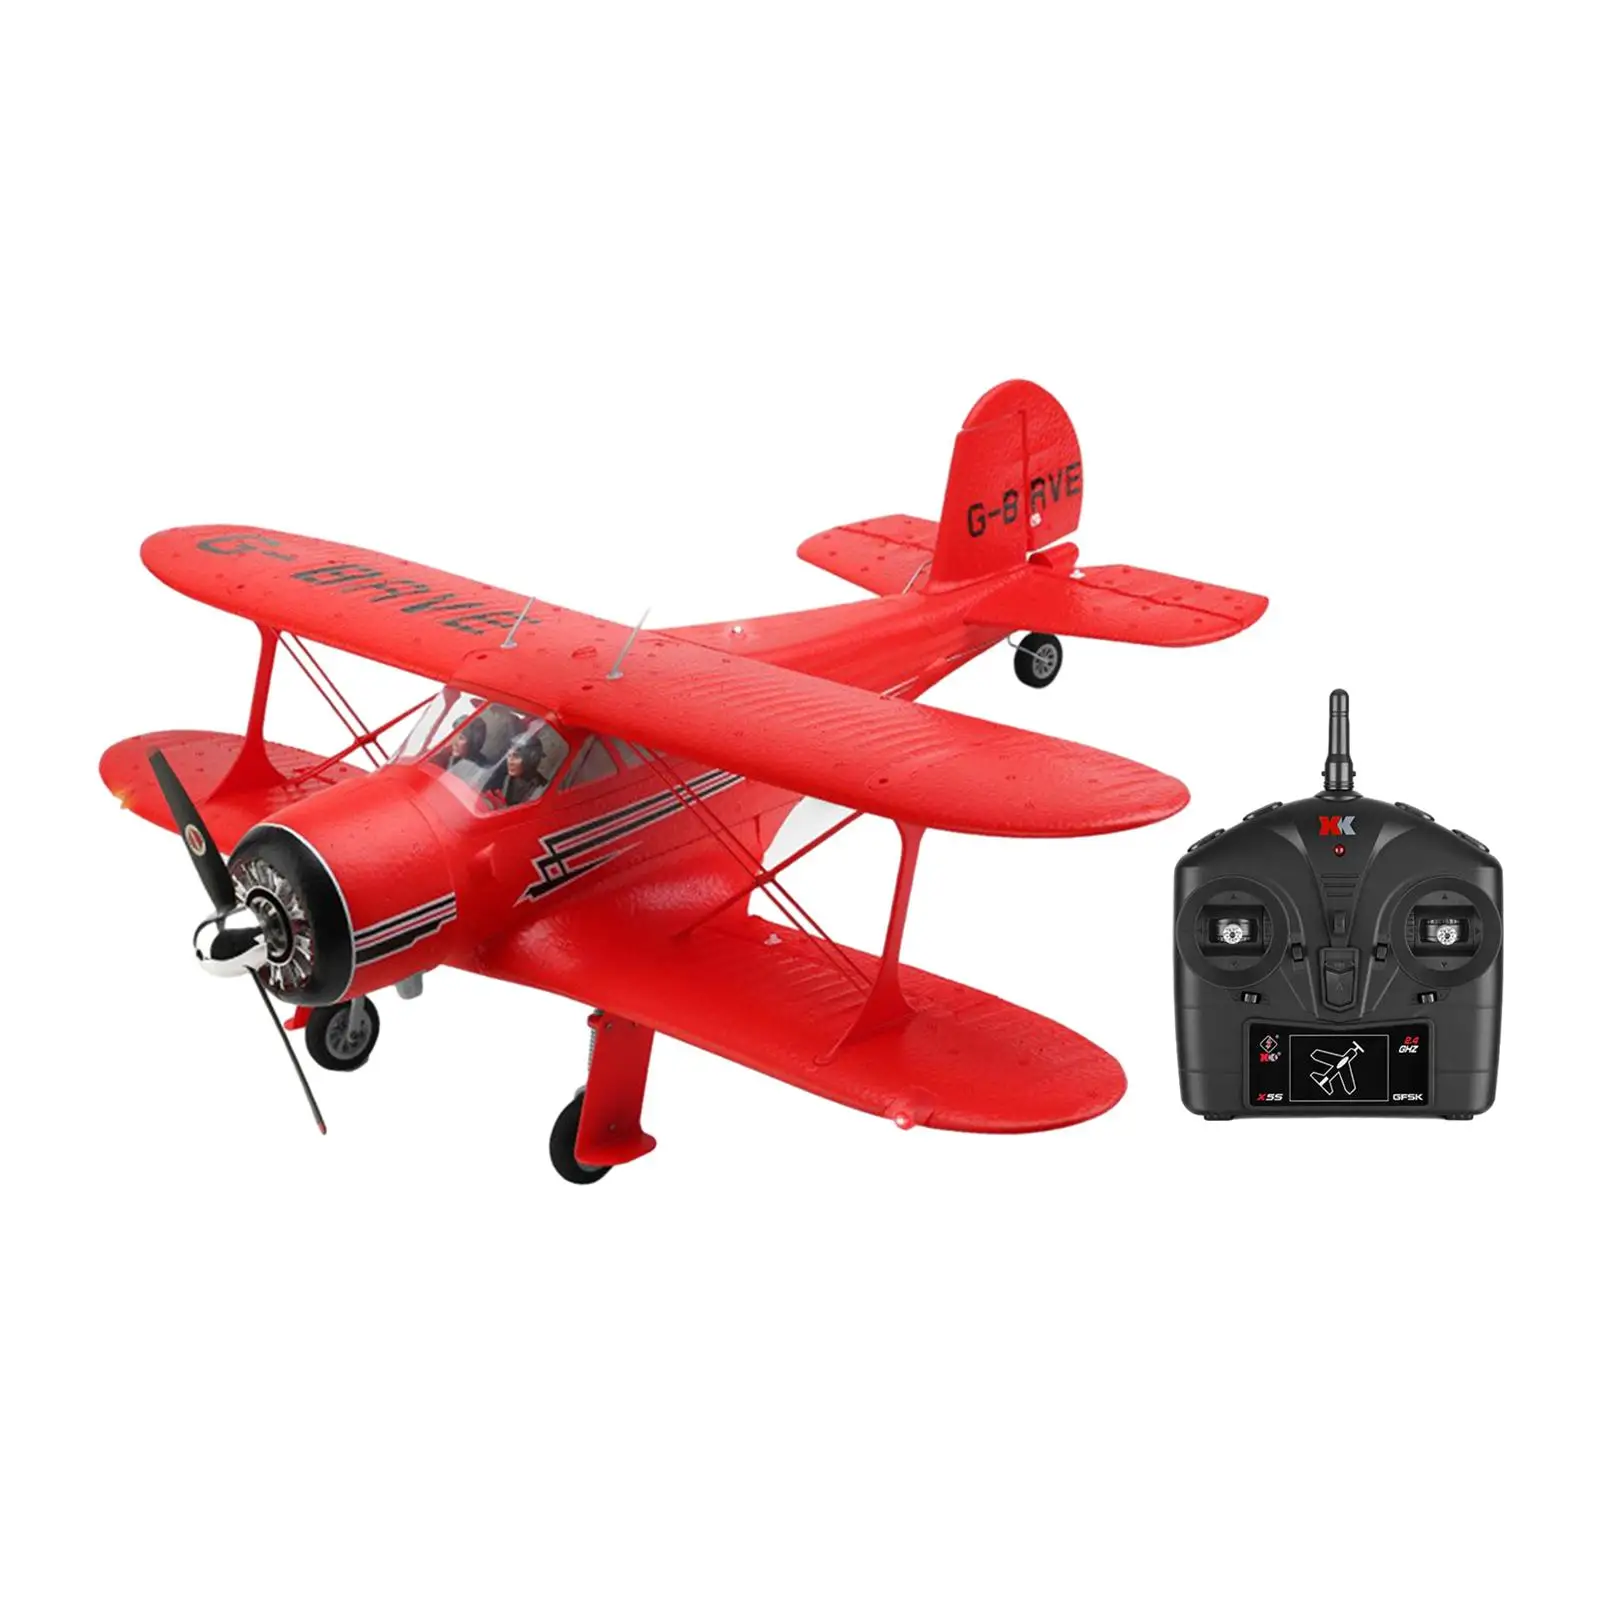 Wltoys A300 Beech D17S RC Plane with 3D/6G Mode Stunt Flying 4CH Easy to Fly EPP Biplane for Beginner Kids Adults Birthday Gifts